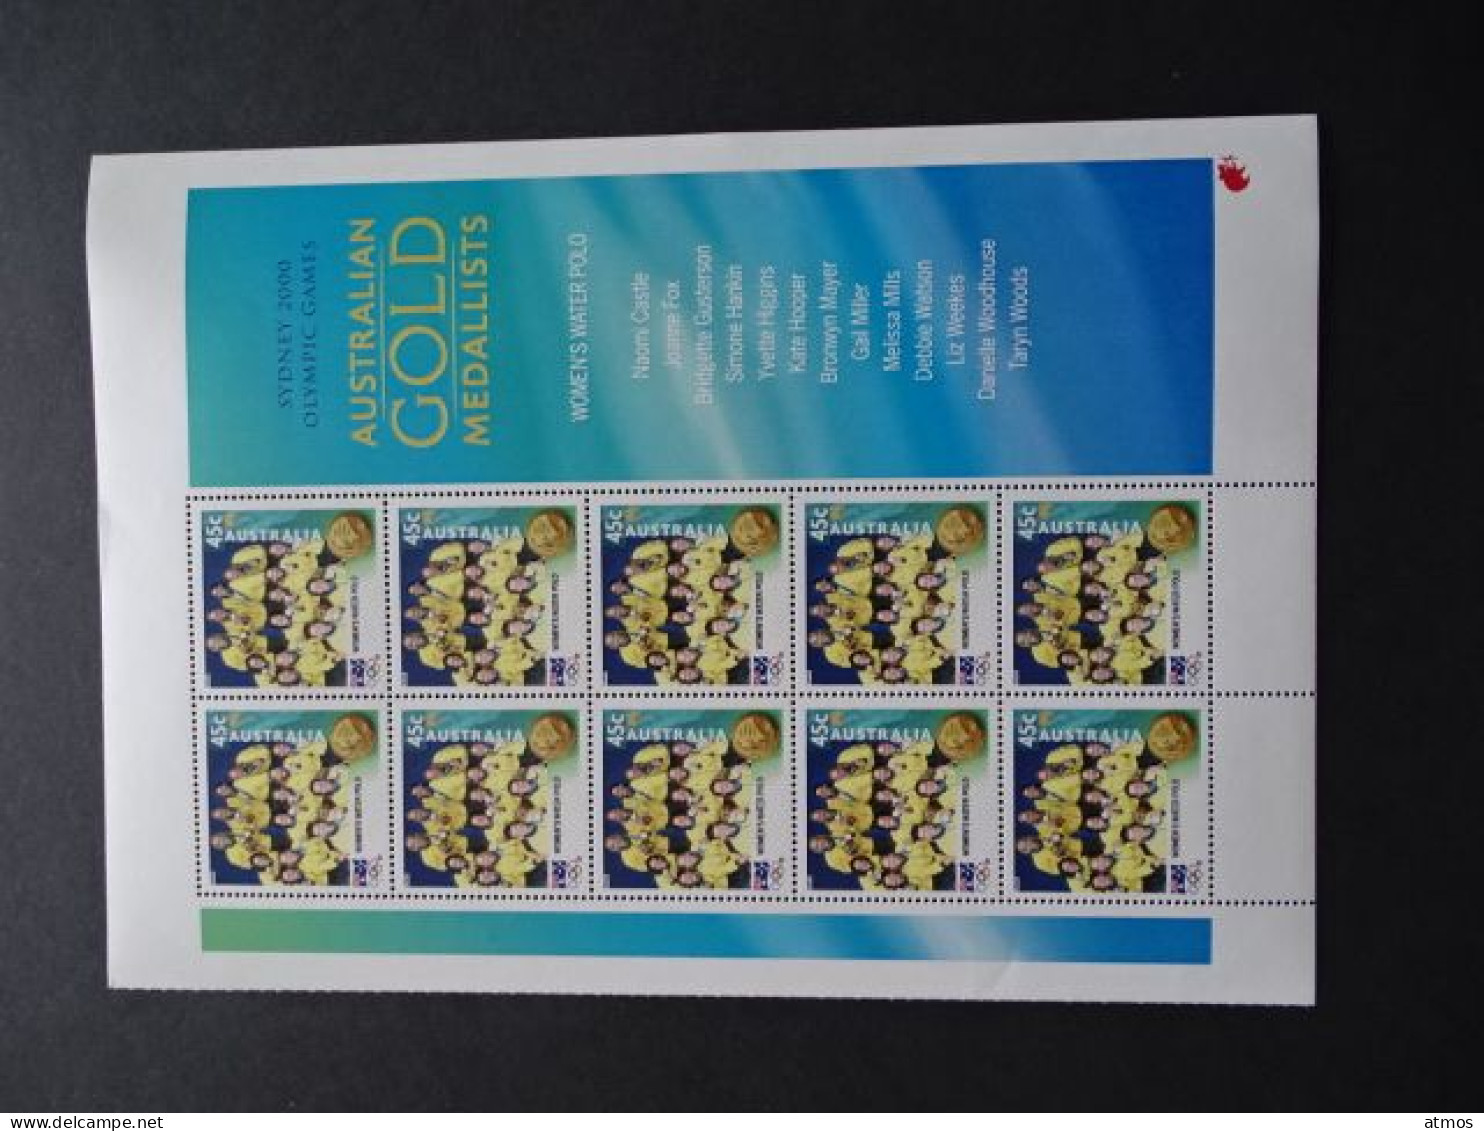 Australia MNH Michel Nr 1982 Sheet Of 10 From 2000 QLD - Mint Stamps